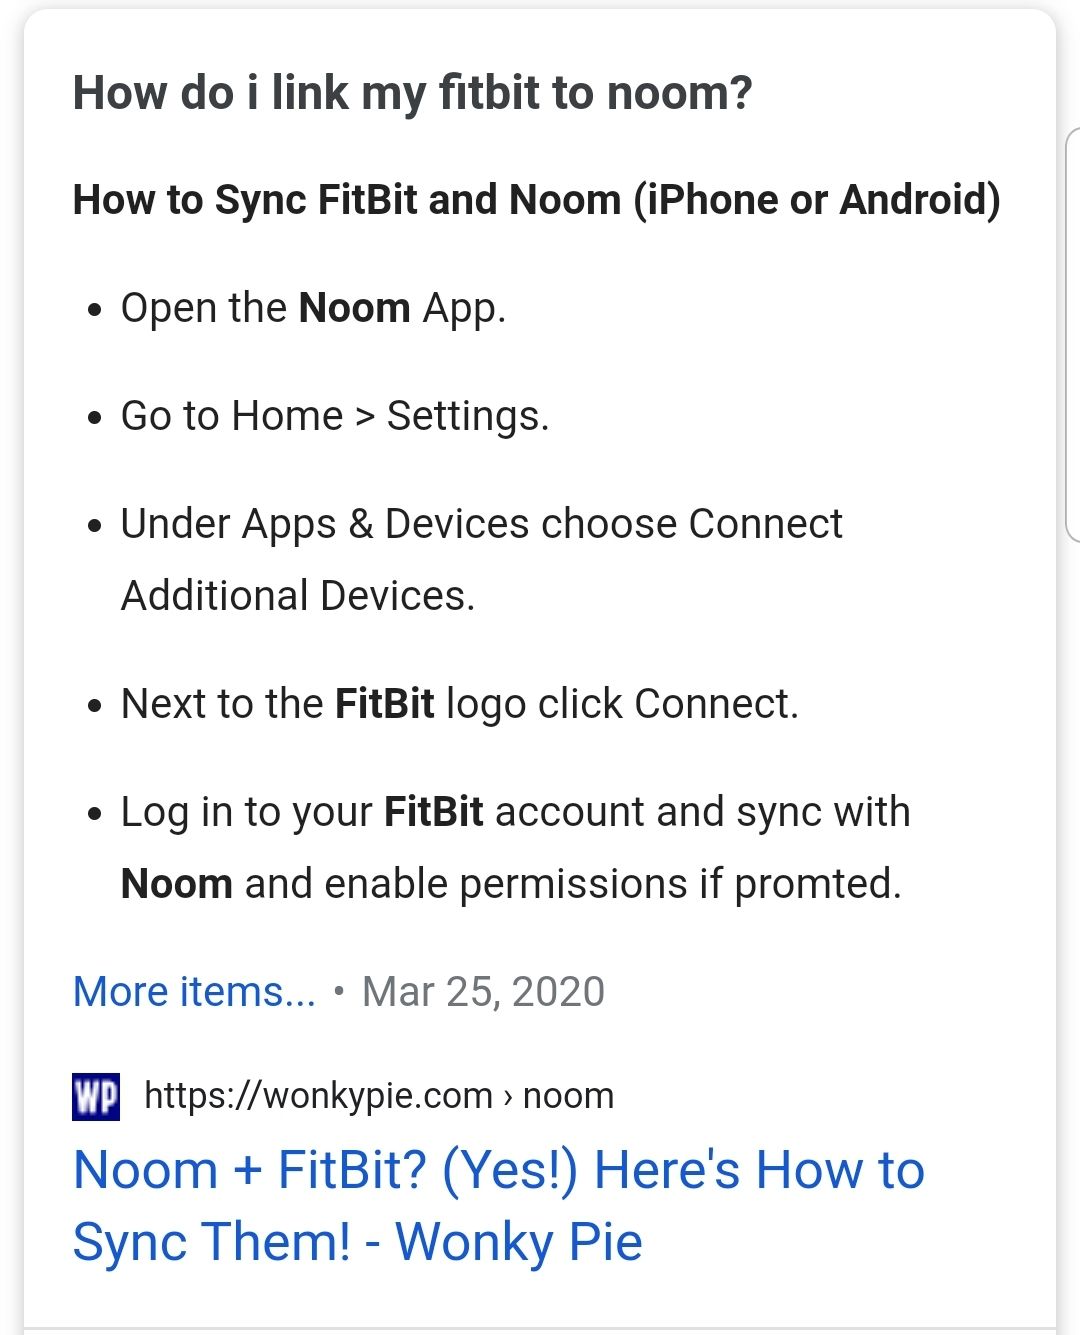 how do i sync my fitbit to noom